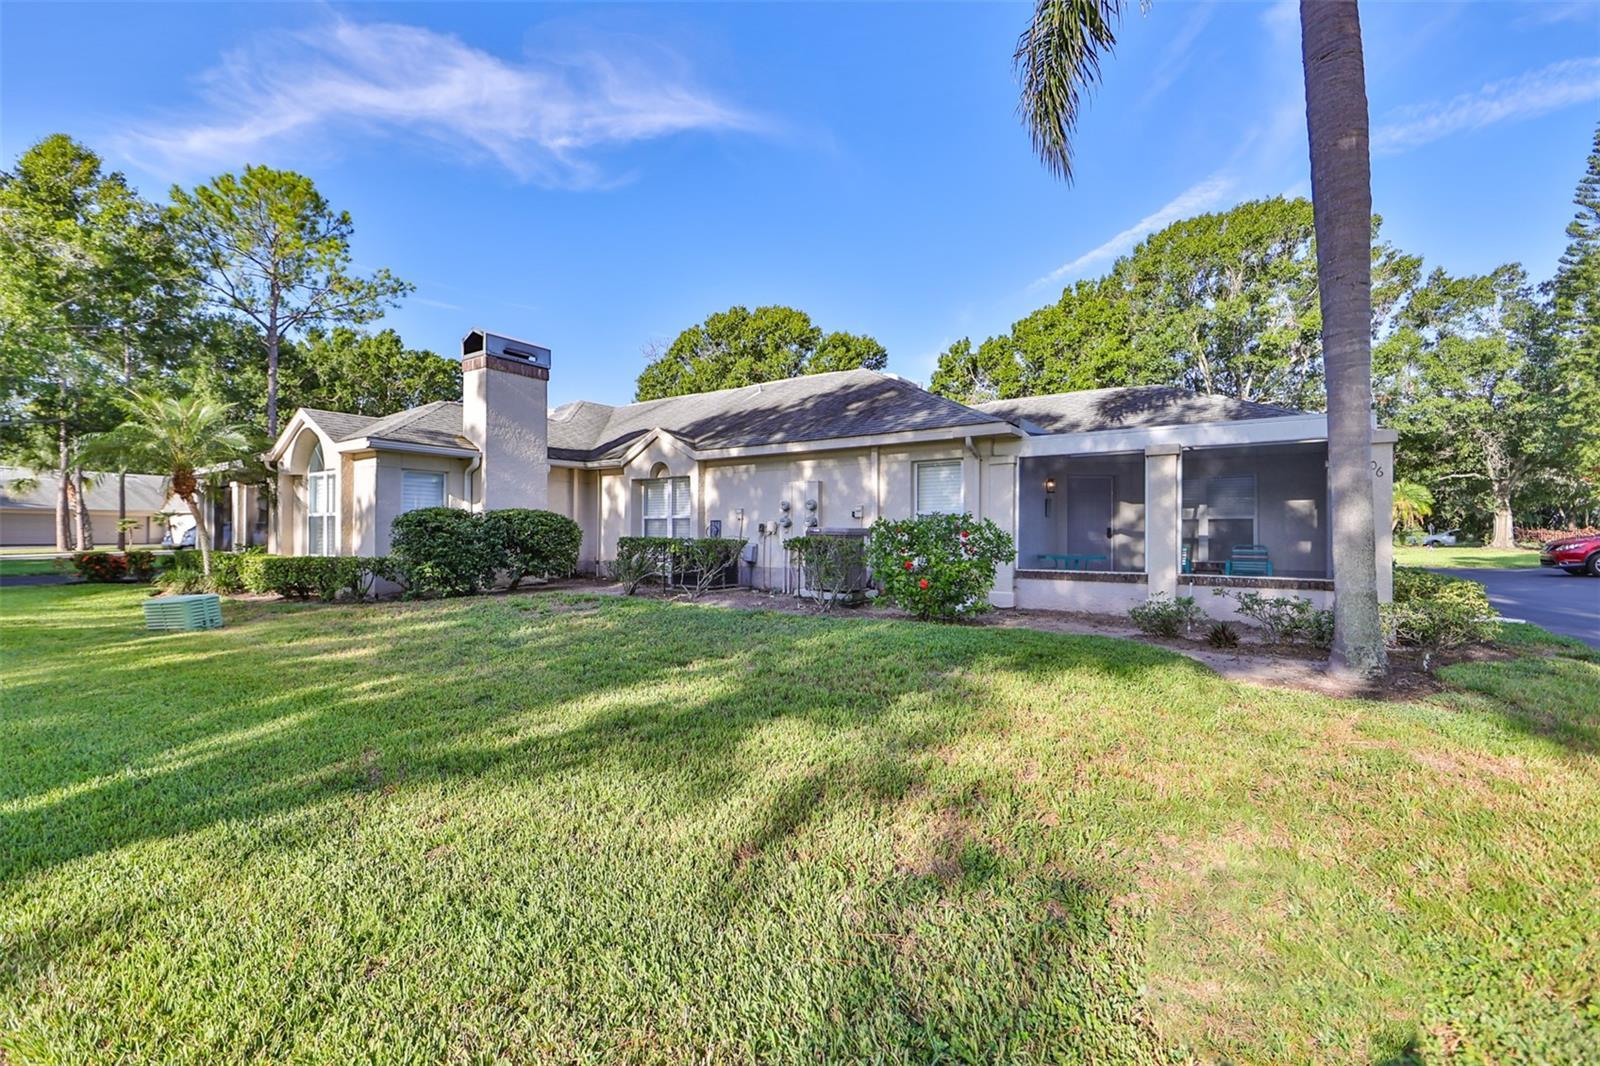 Photo one of 906 Golfview Woods Dr # 906 Ruskin FL 33573 | MLS T3464701